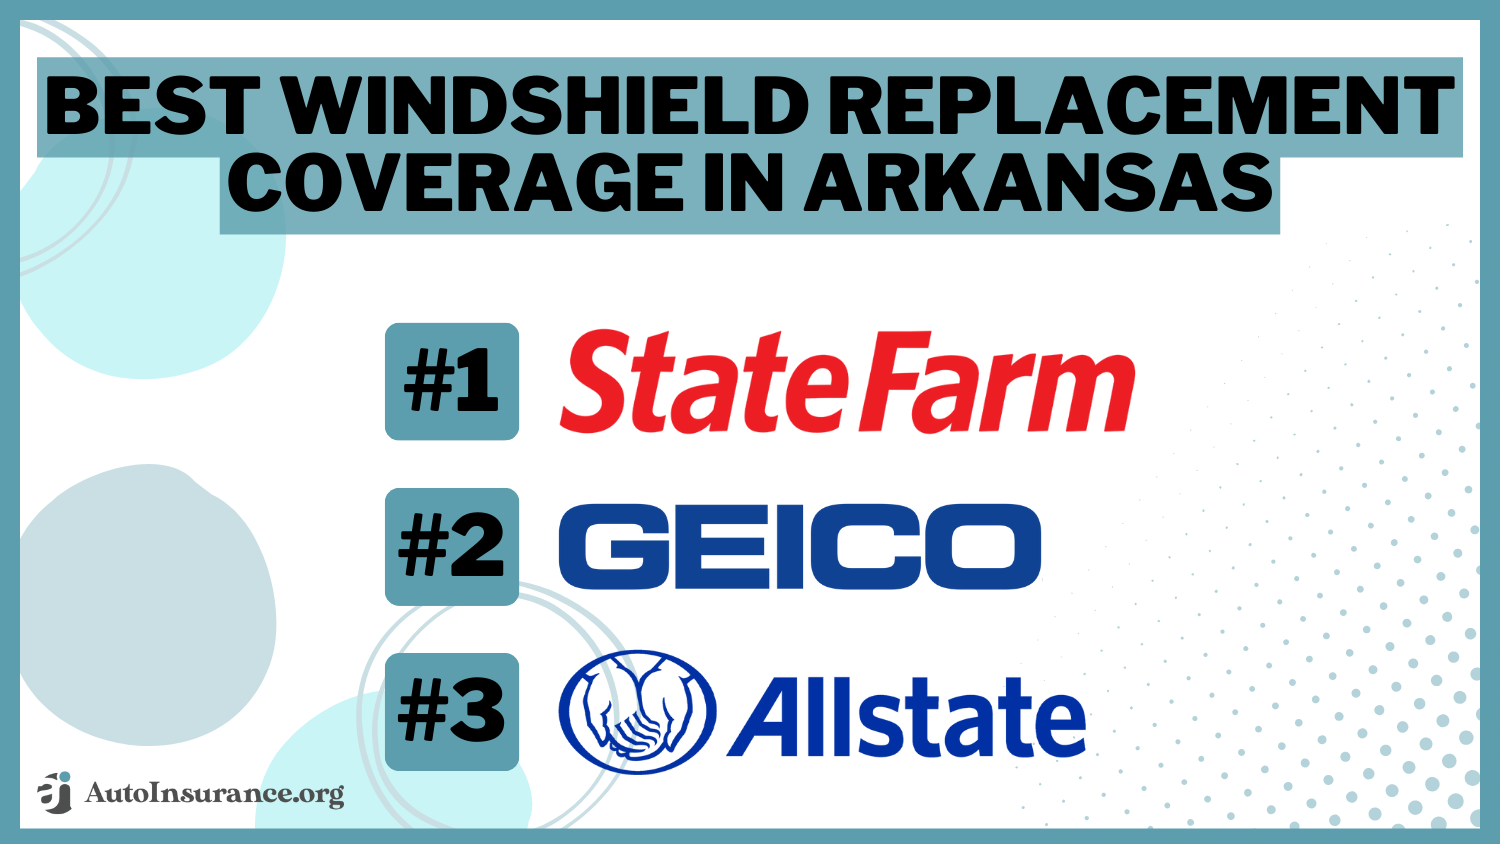 Best Windshield Replacement Coverage in Arkansas: State Farm, Geico, and Allstate